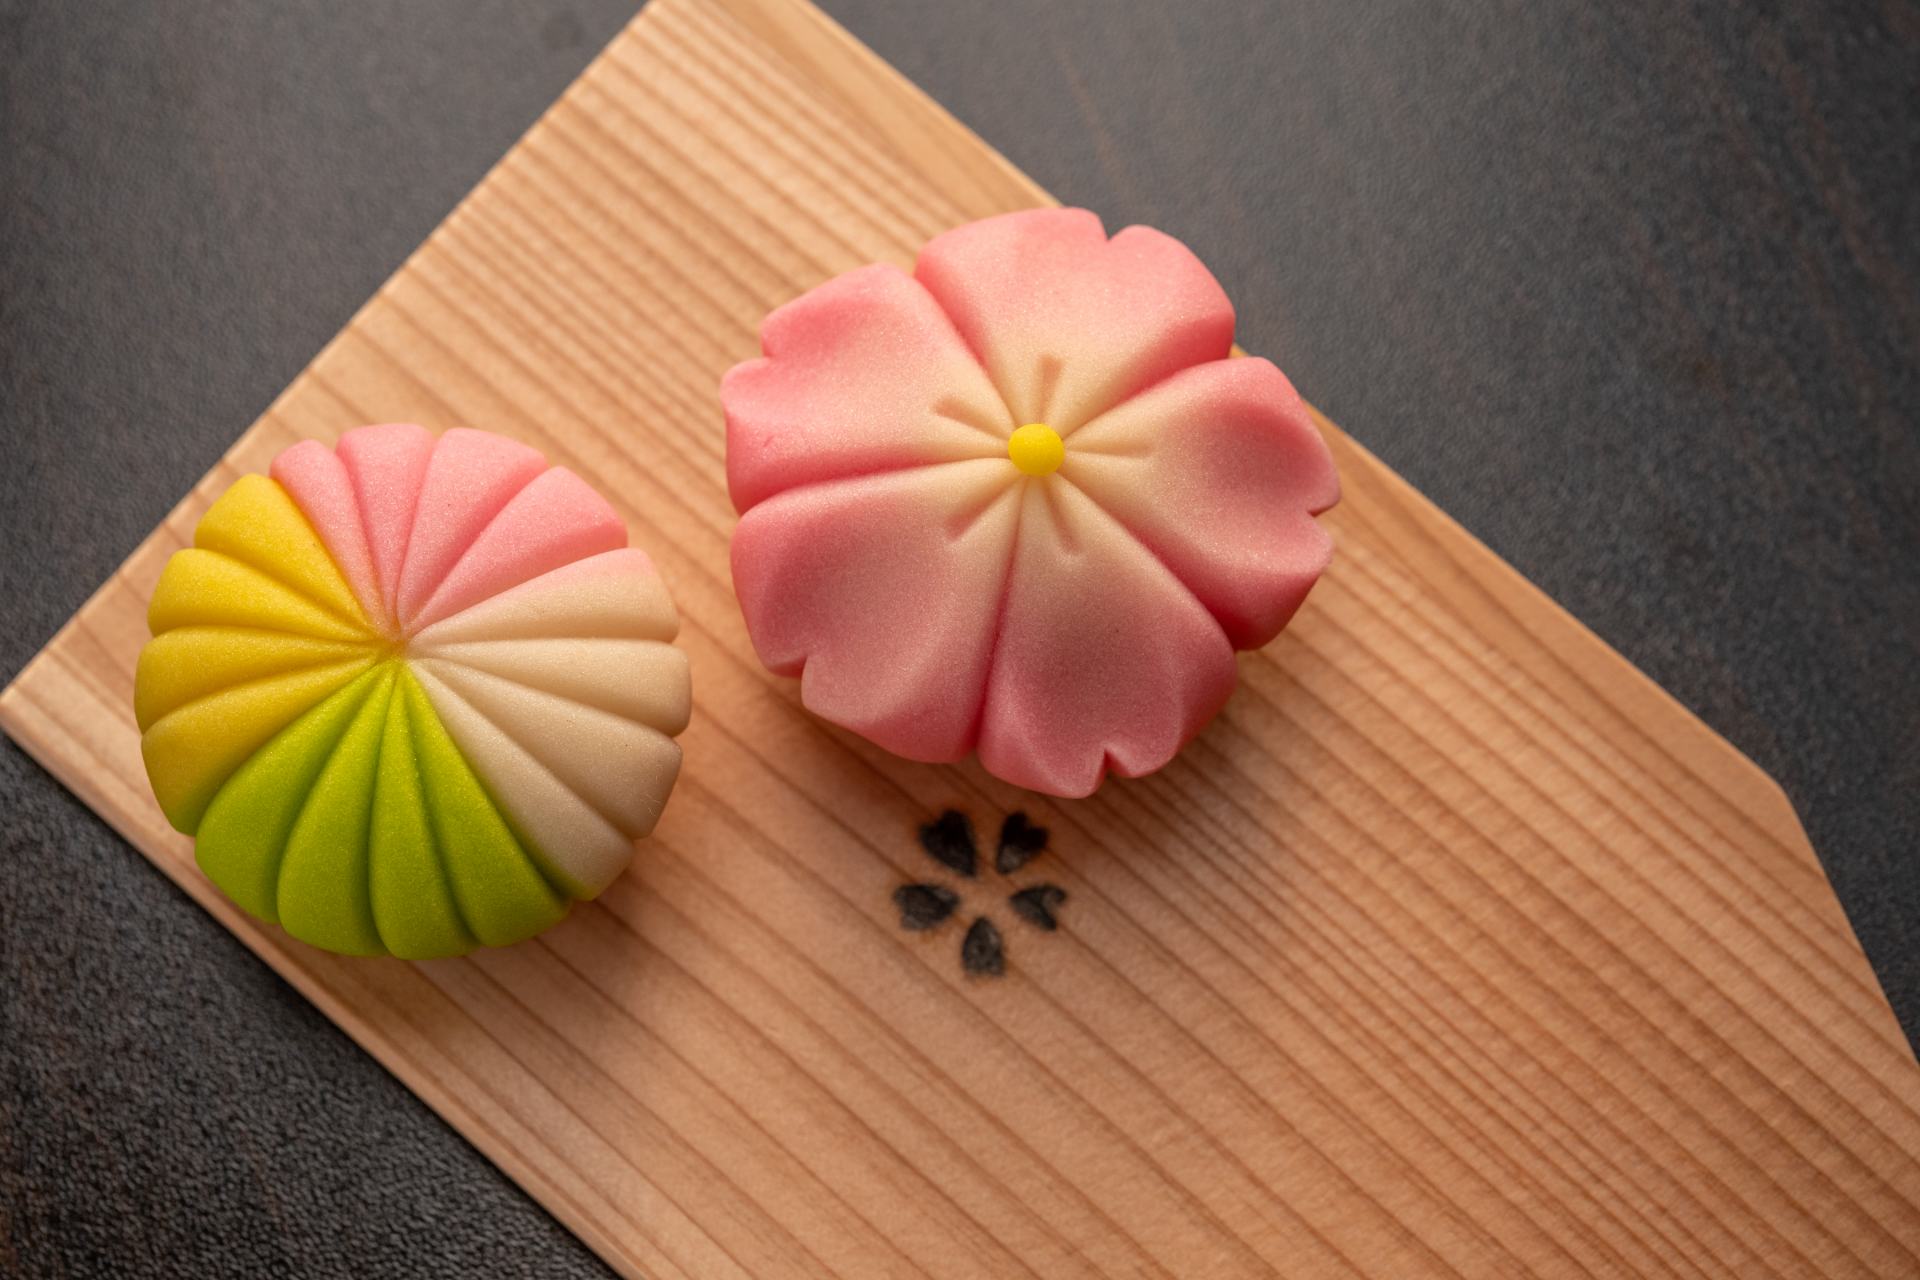 Learn About Japanese Culture in Ise: A Hands-on Workshop for Japanese Wagashi Confections Made with Locally-Sourced Ingredients